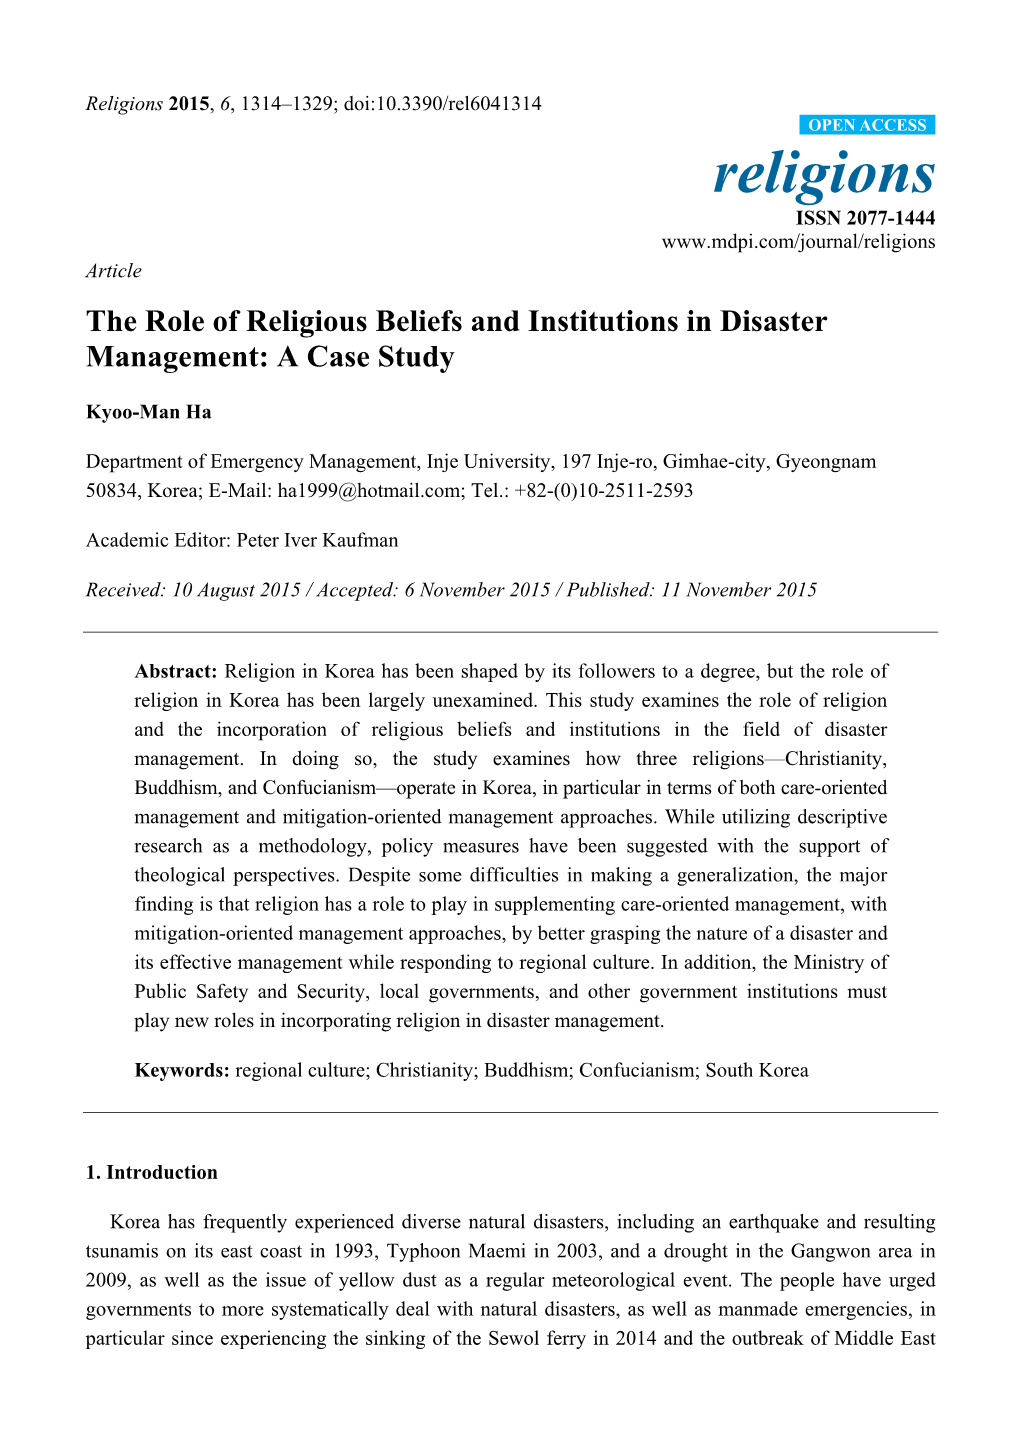 The Role of Religious Beliefs and Institutions in Disaster Management: a Case Study